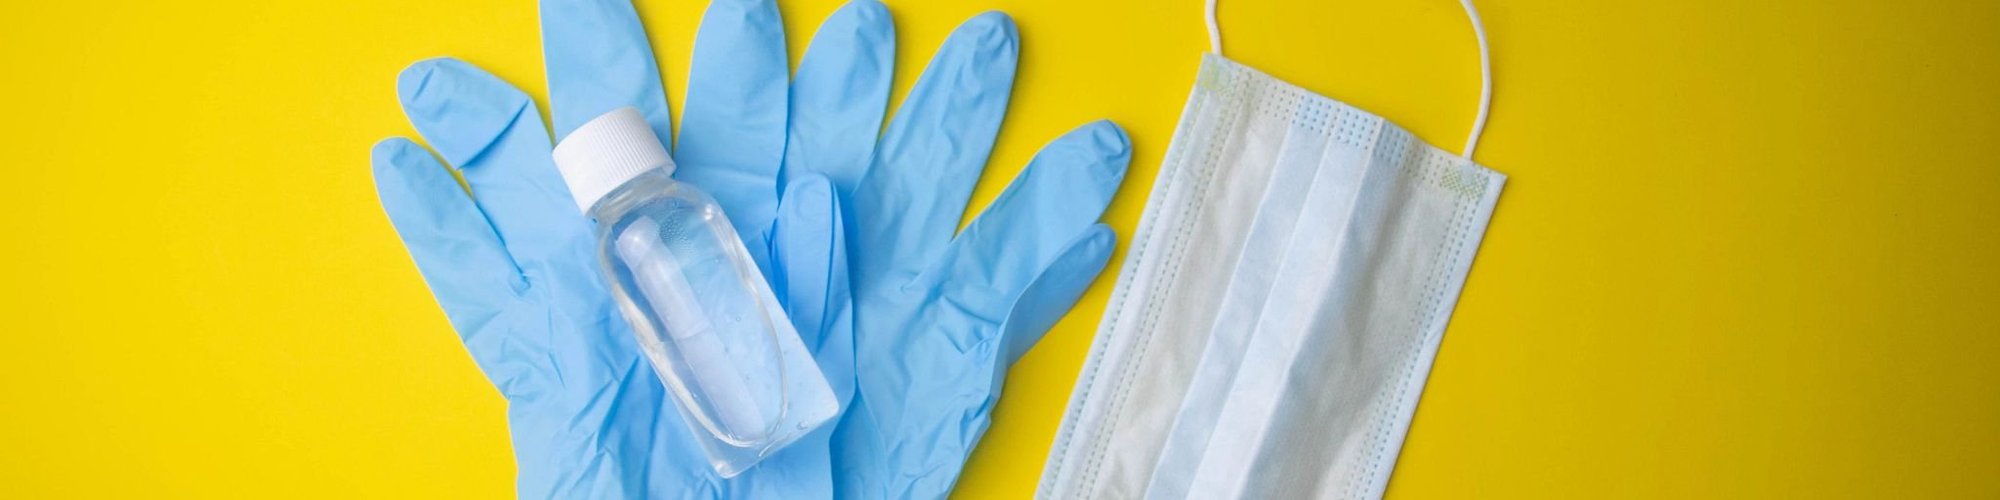 Latex Gloves and Medical Face Mask Banner Image